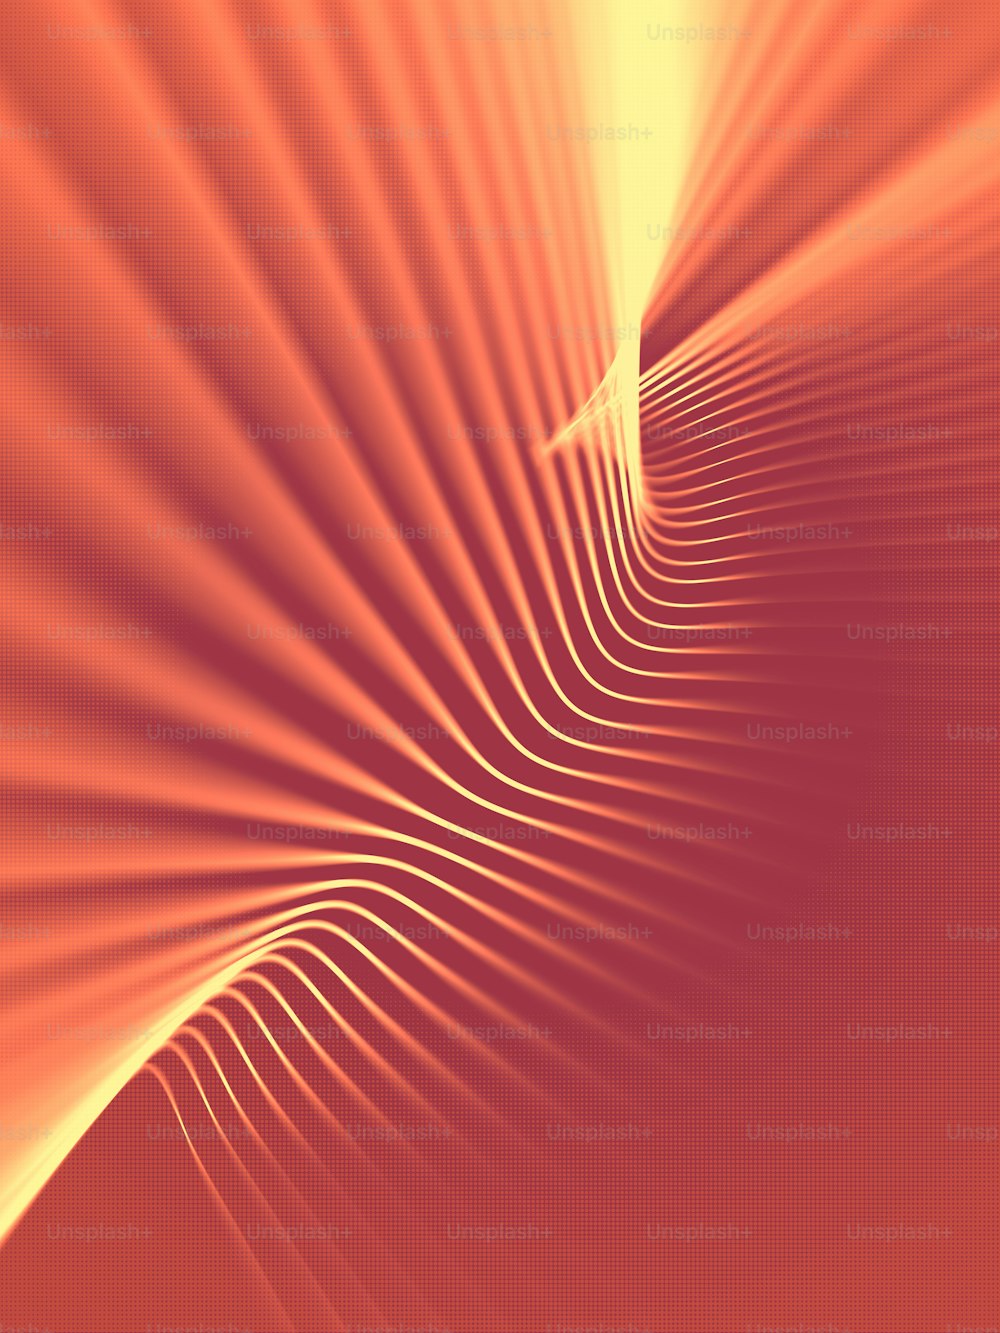 Abstract curved lines technology background. Graphic modern pattern. 3d rendering digital illustration